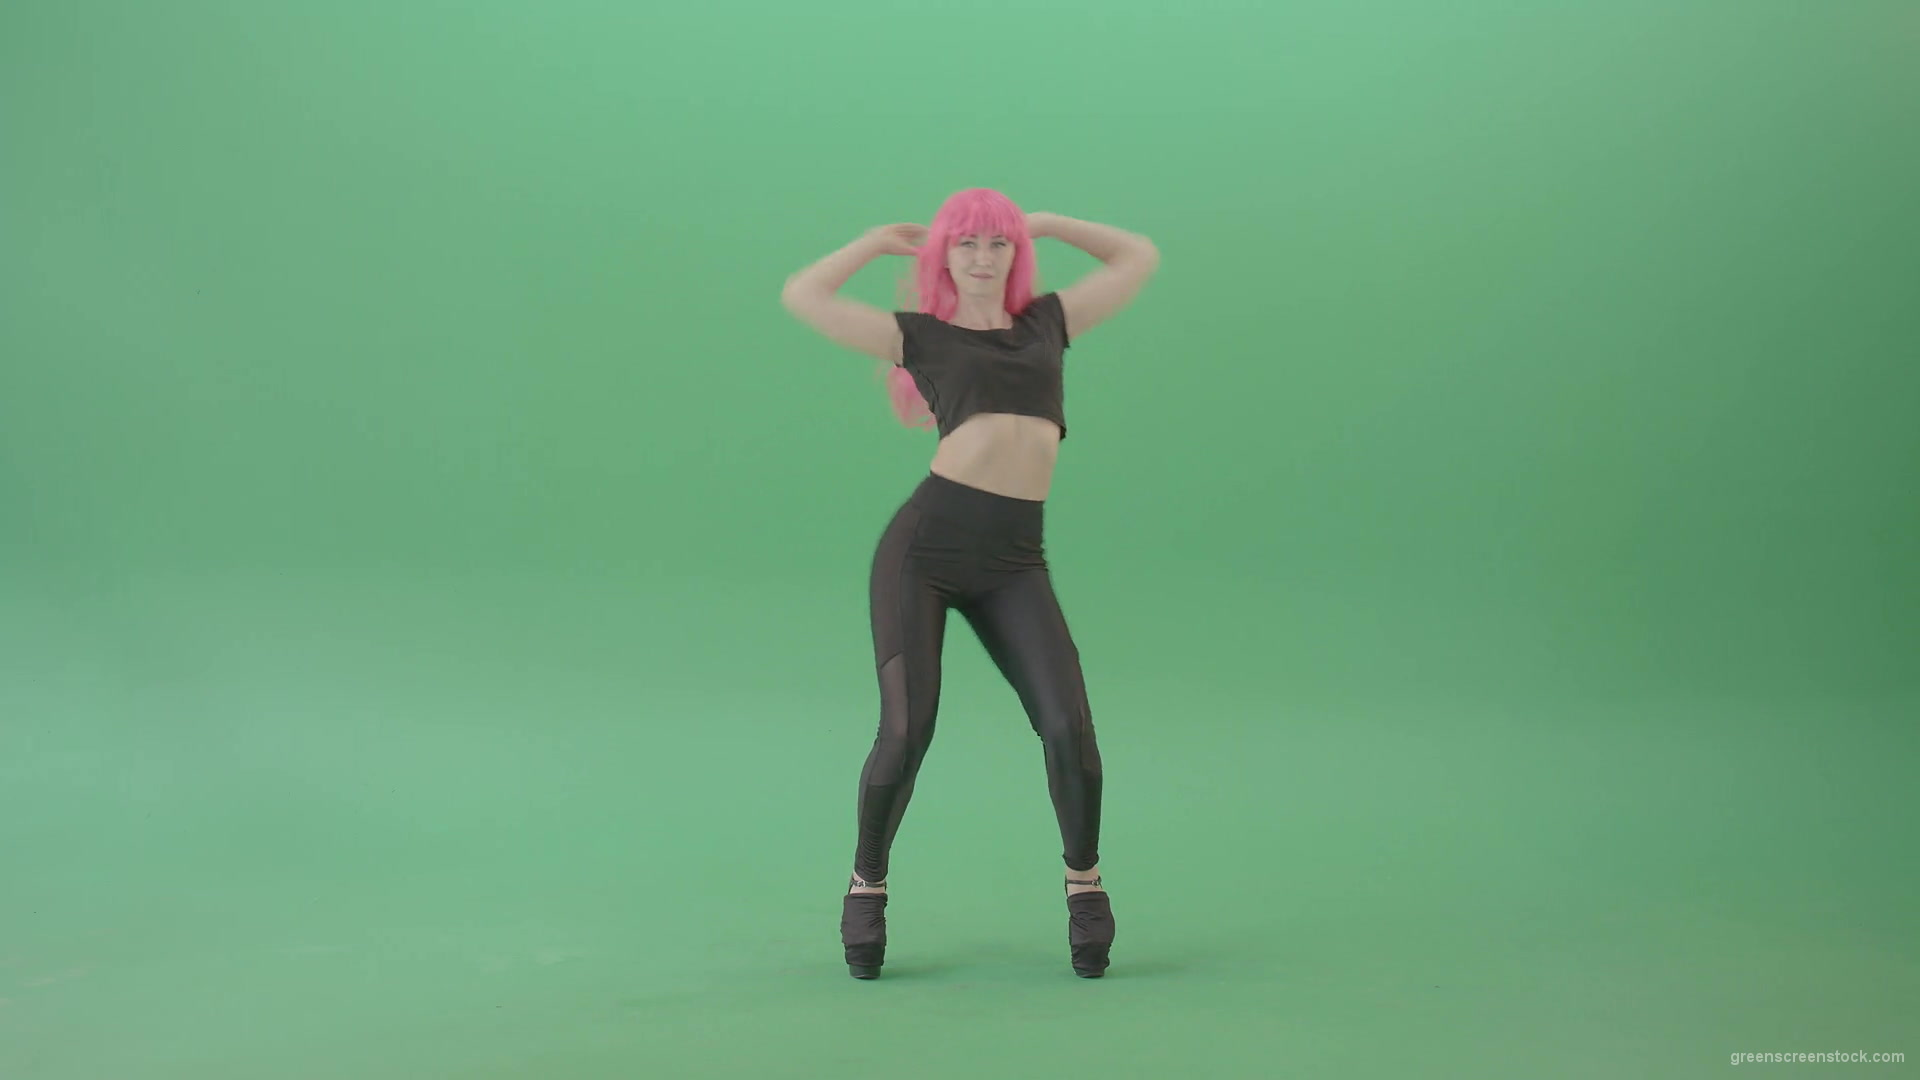 Pink-hair-EMO-sexy-girl-on-green-screen-posing-and-dancing-4K-Video-Footage-1920_005 Green Screen Stock